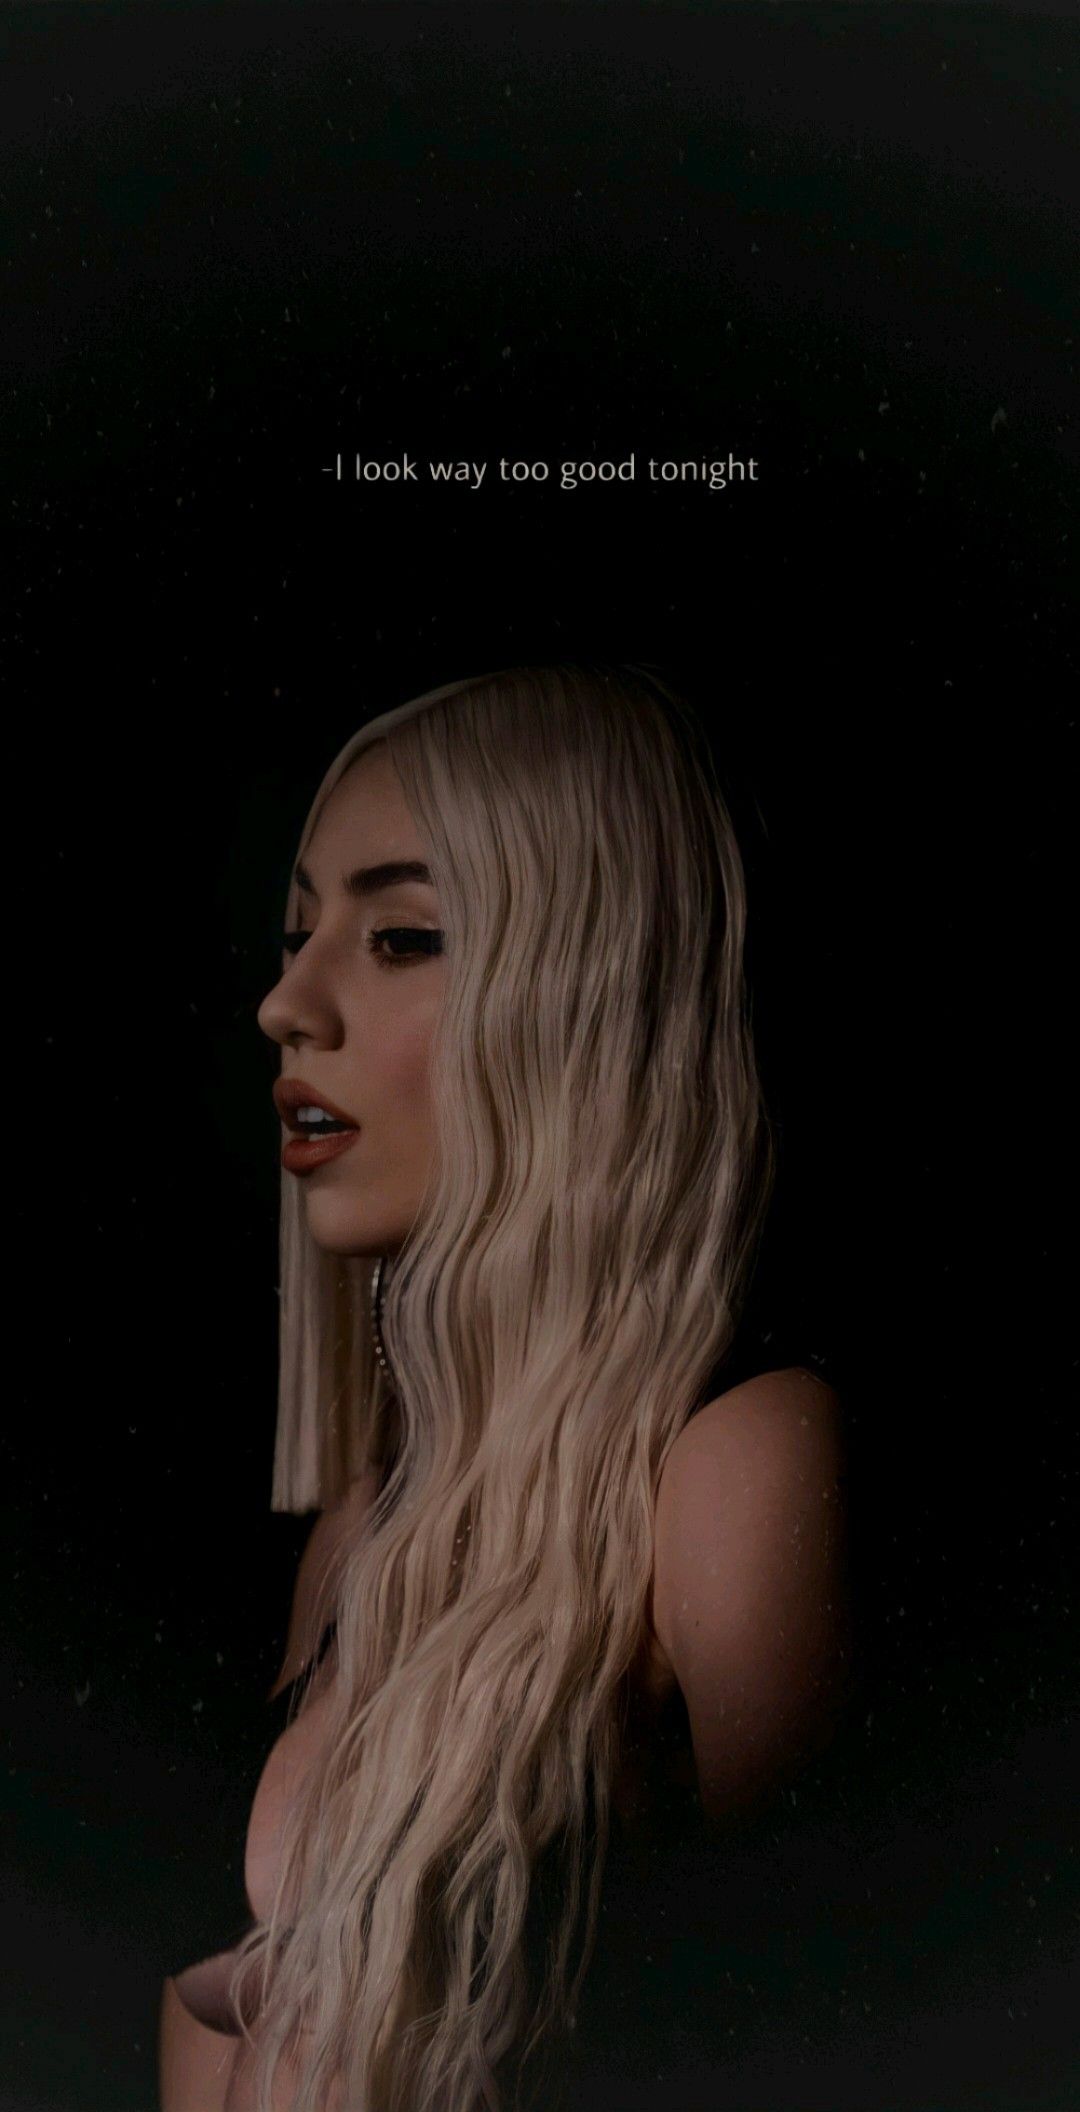 Ava Max Wallpapers